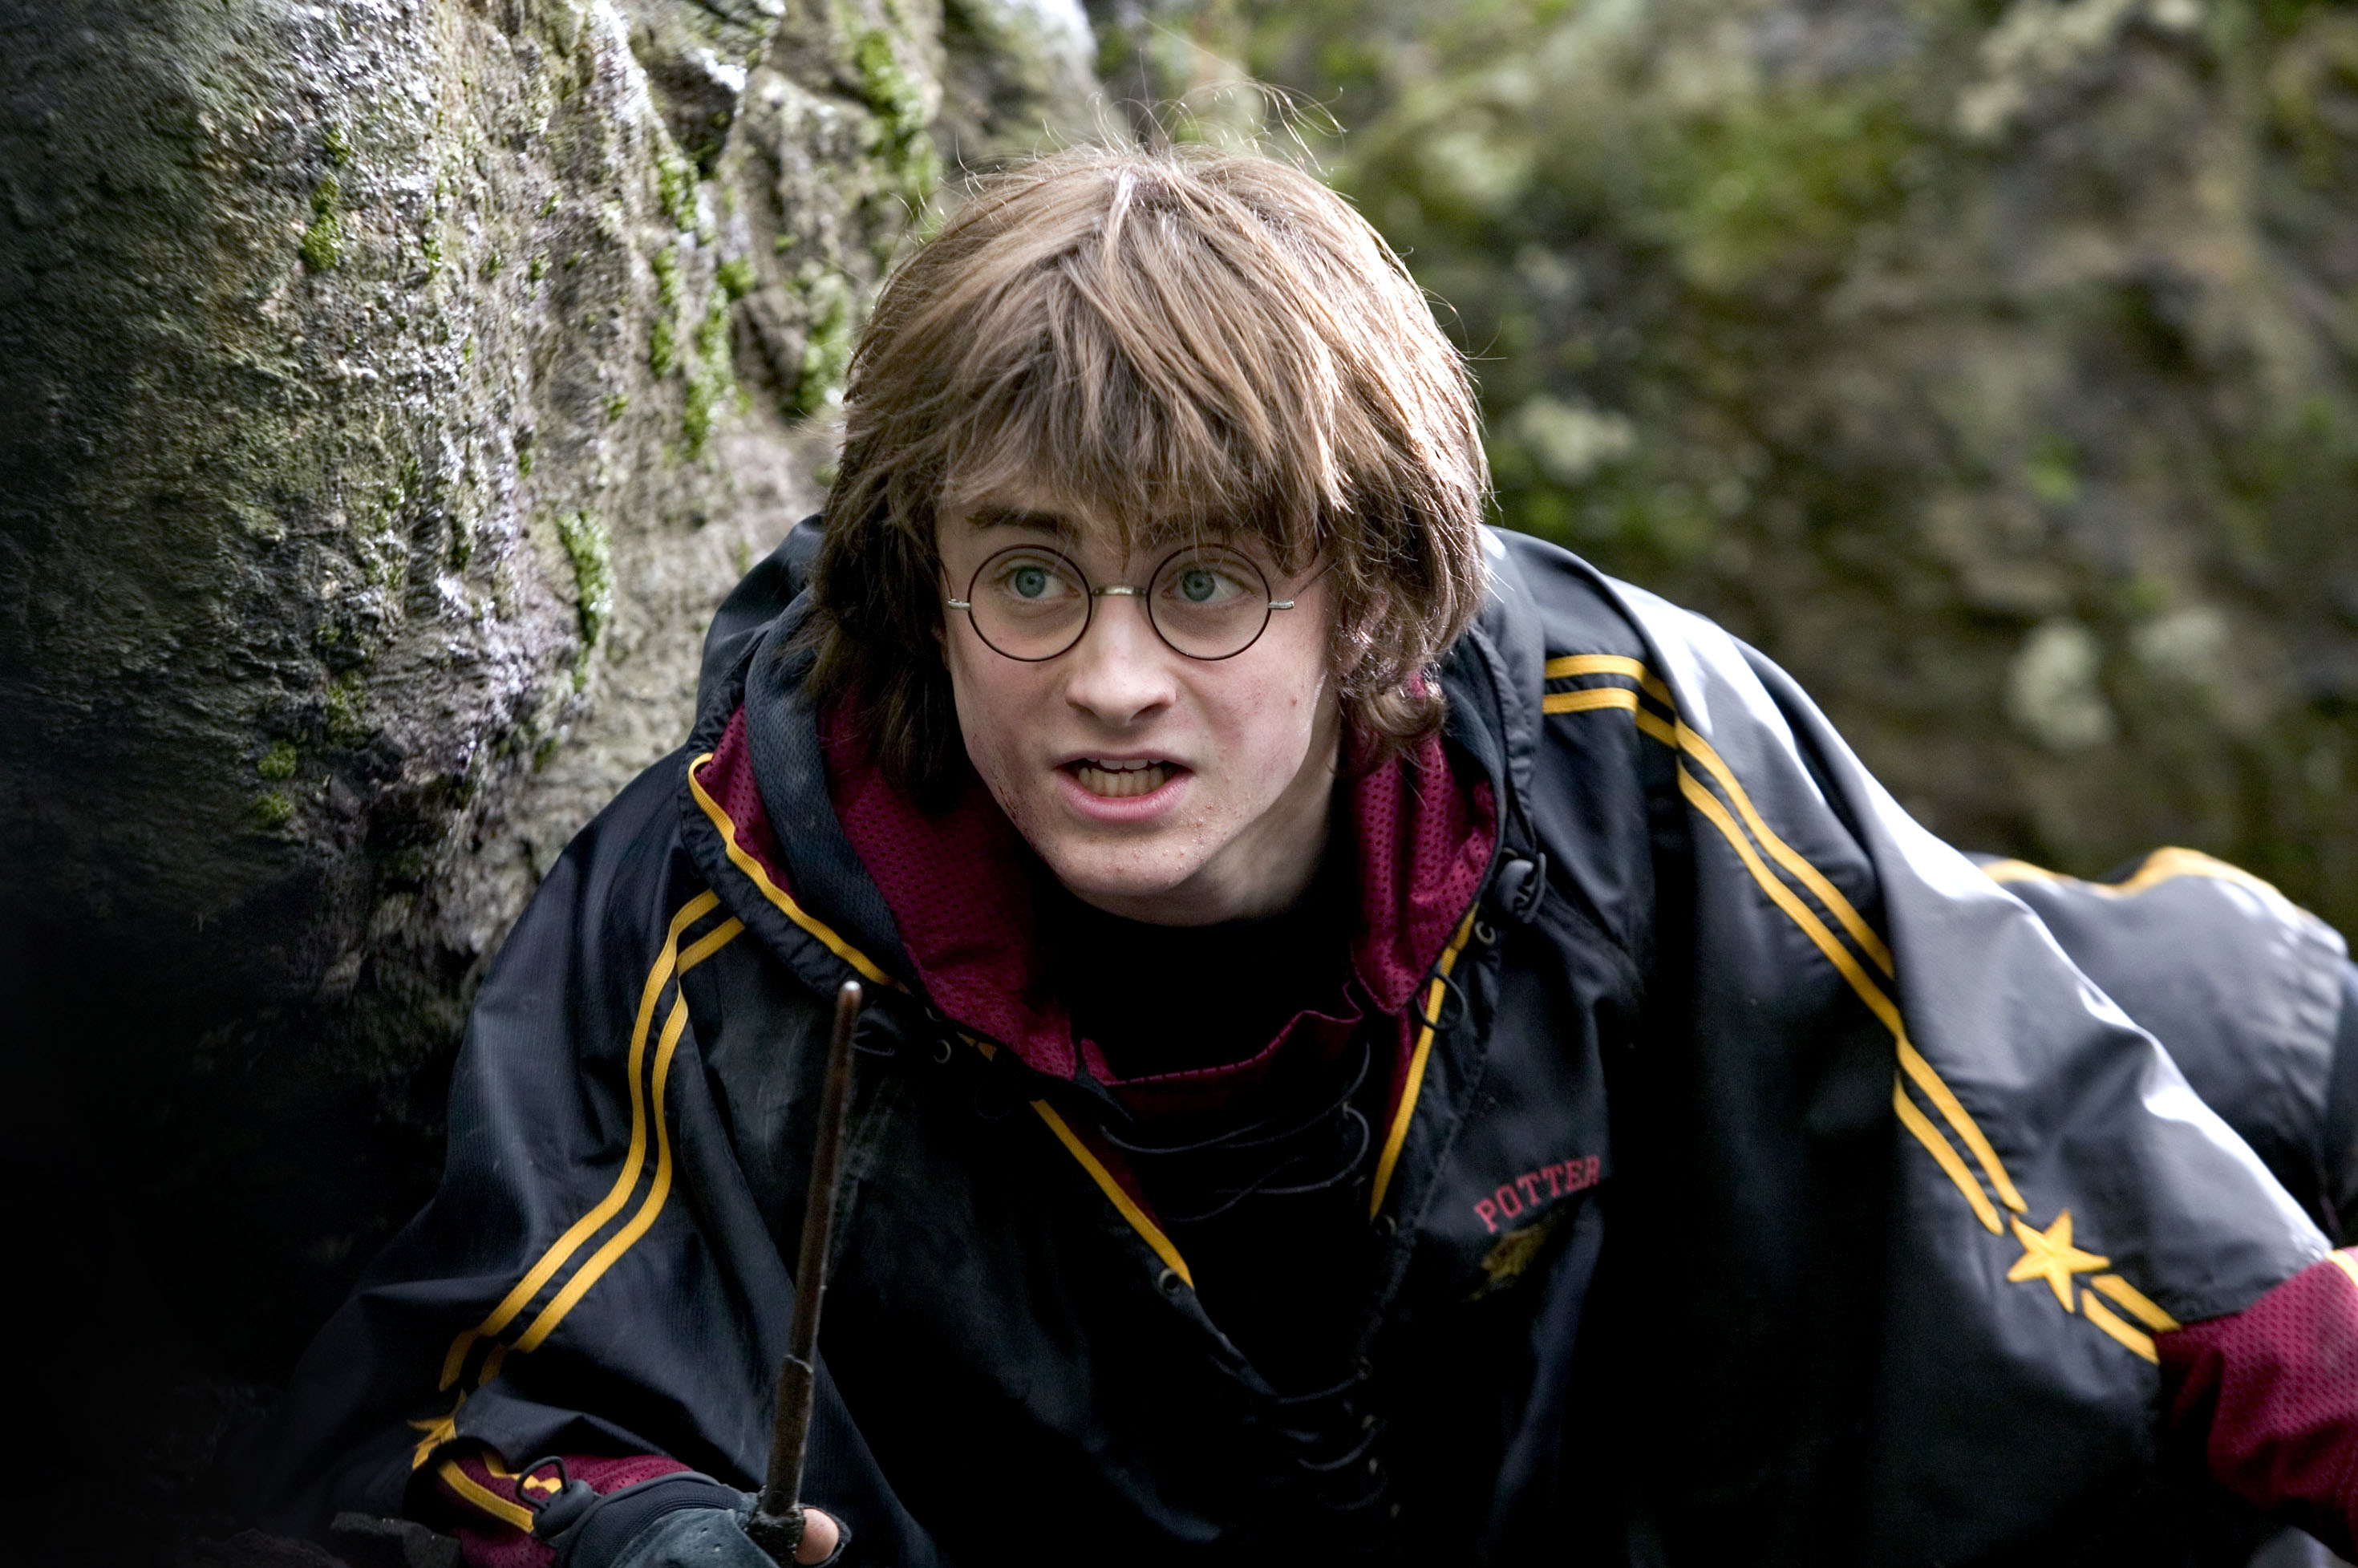 Harry Potter in a Quidditch robe, with a wand, looking surprised